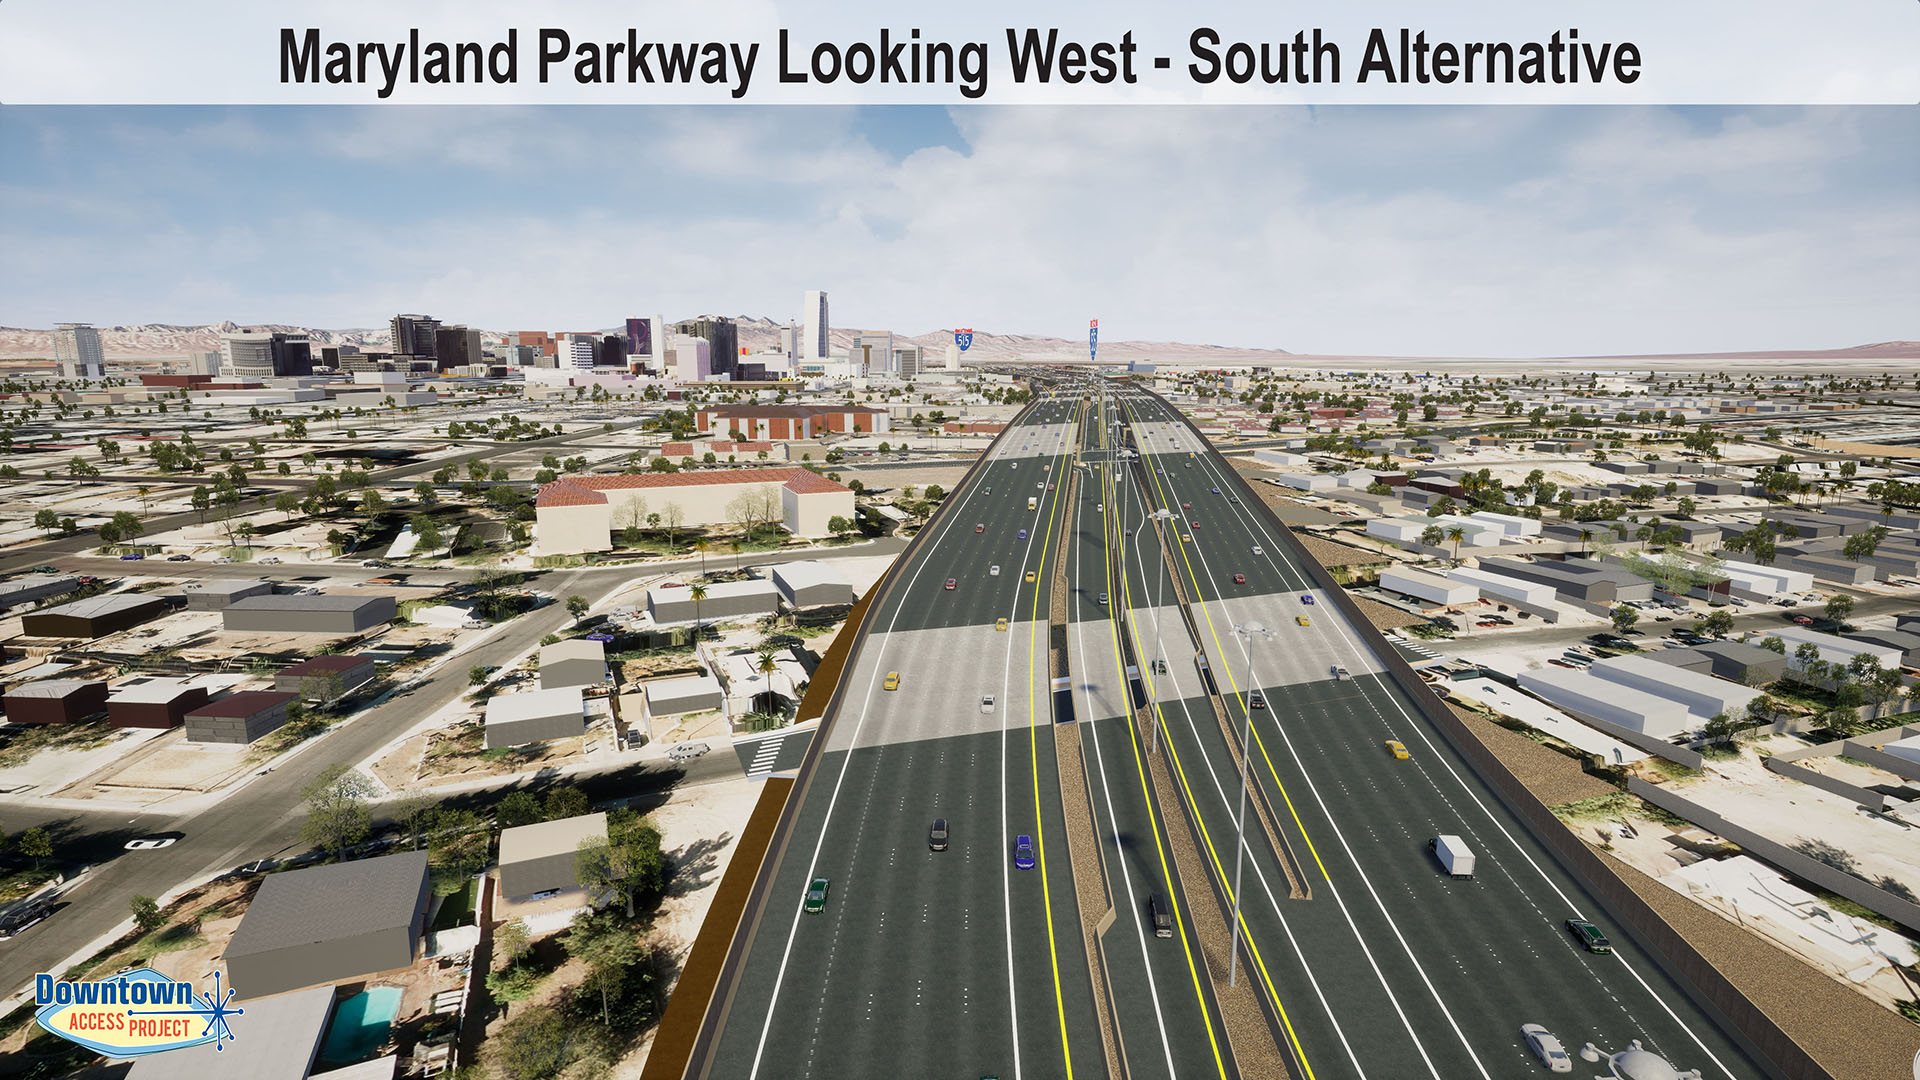 Maryland Parkway Looking West - South Alternative